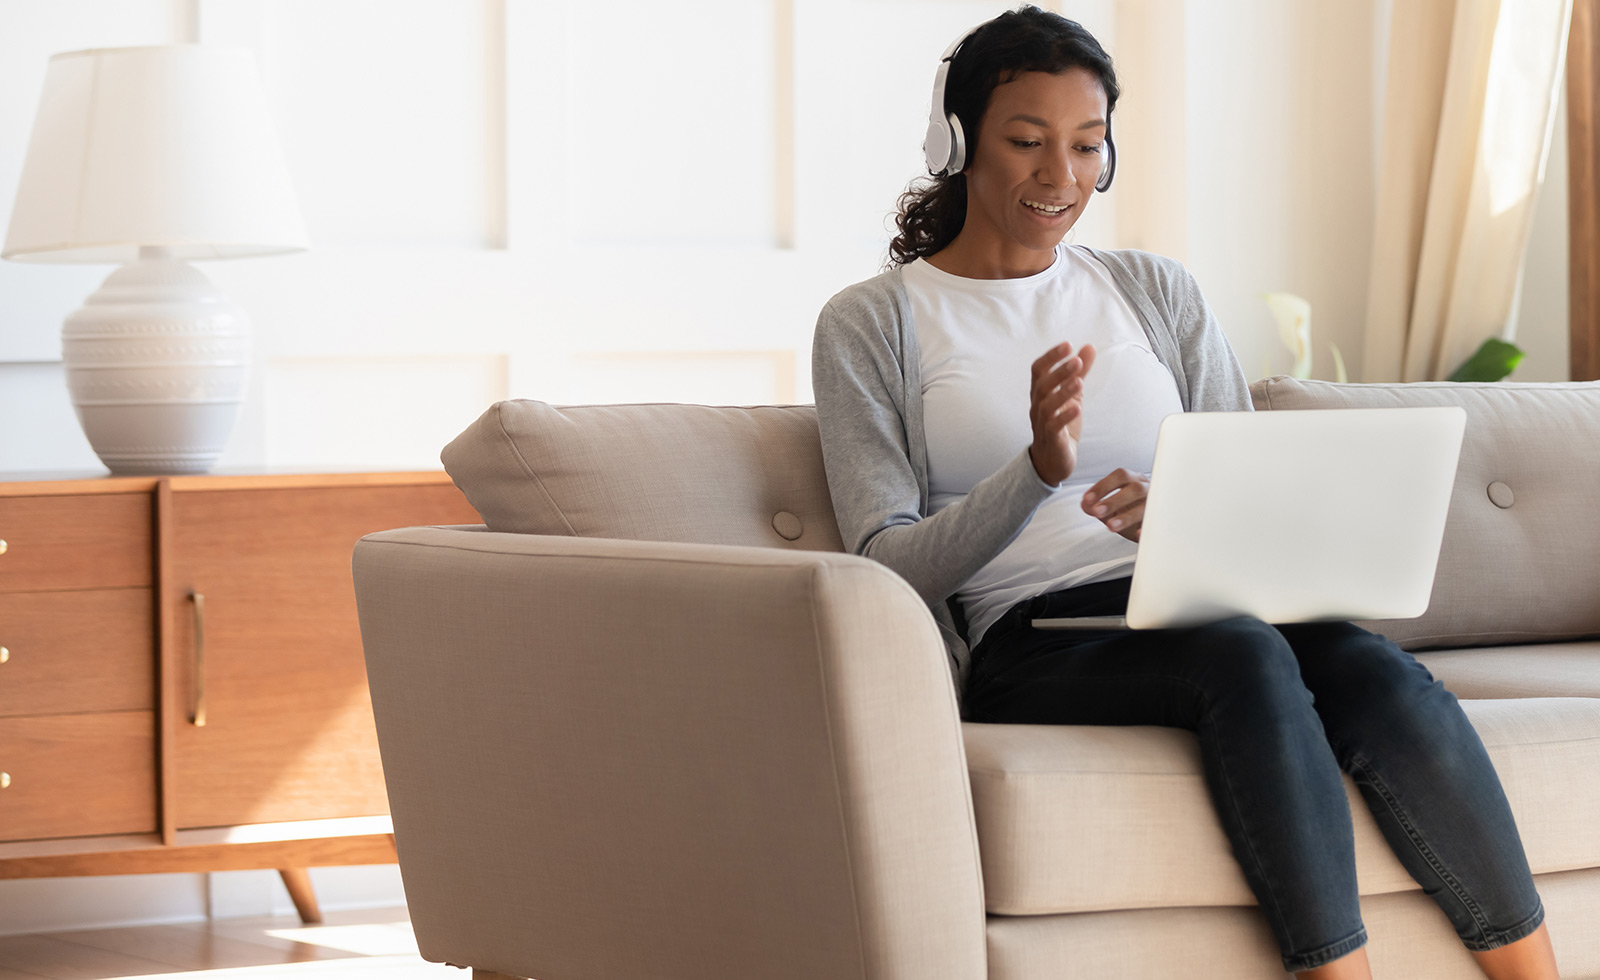 Black woman sitting on the couch wearing headphones and working on a laptop